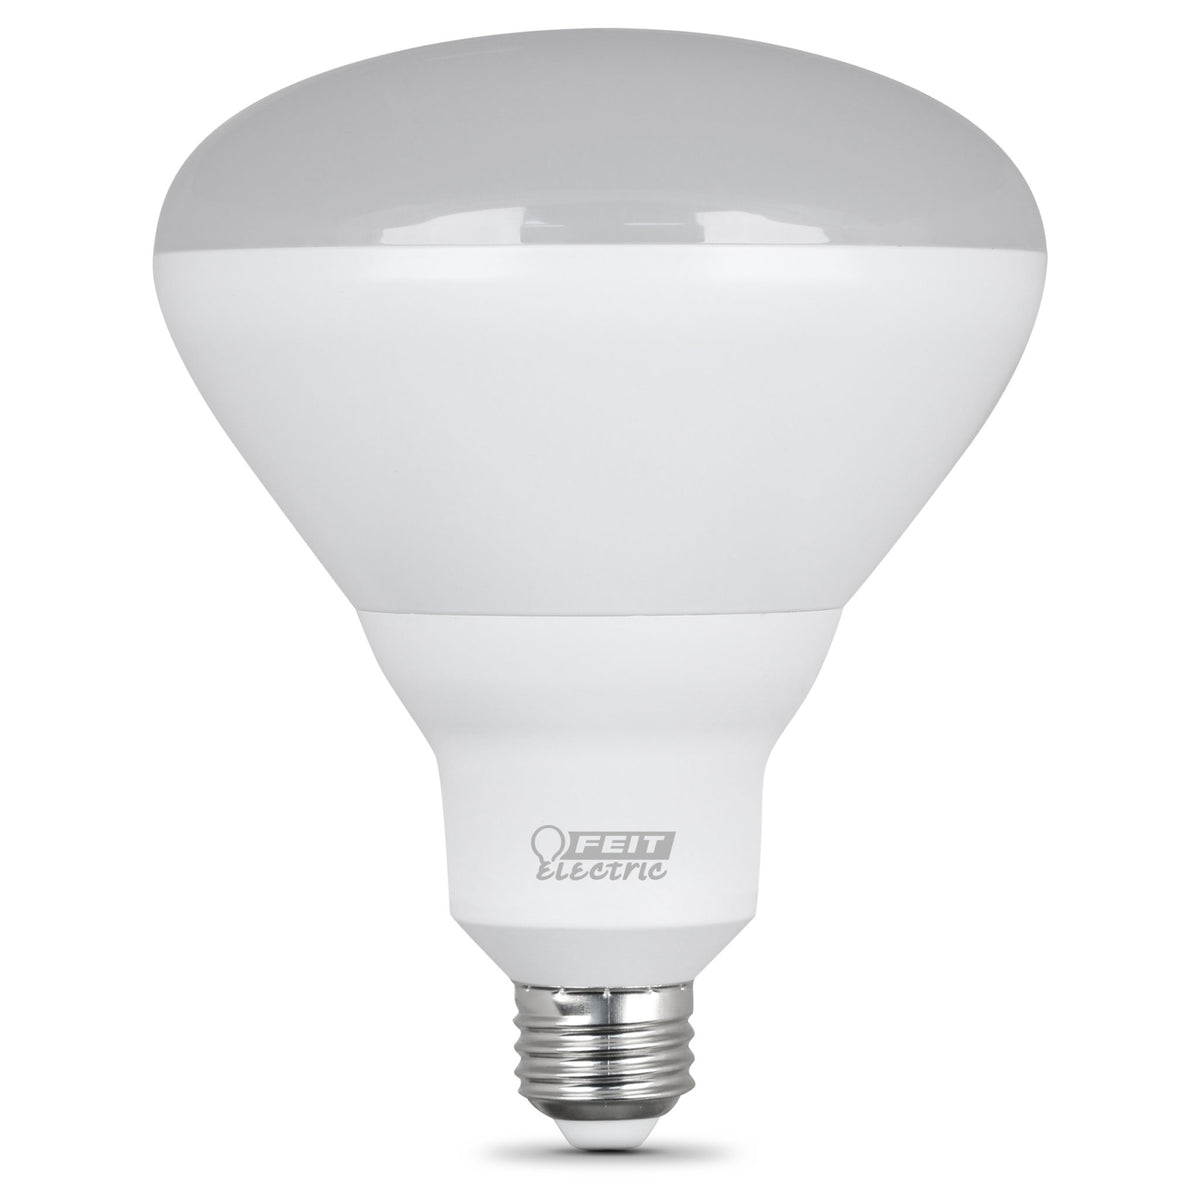 buy reflector light bulbs at cheap rate in bulk. wholesale & retail outdoor lighting products store. home décor ideas, maintenance, repair replacement parts